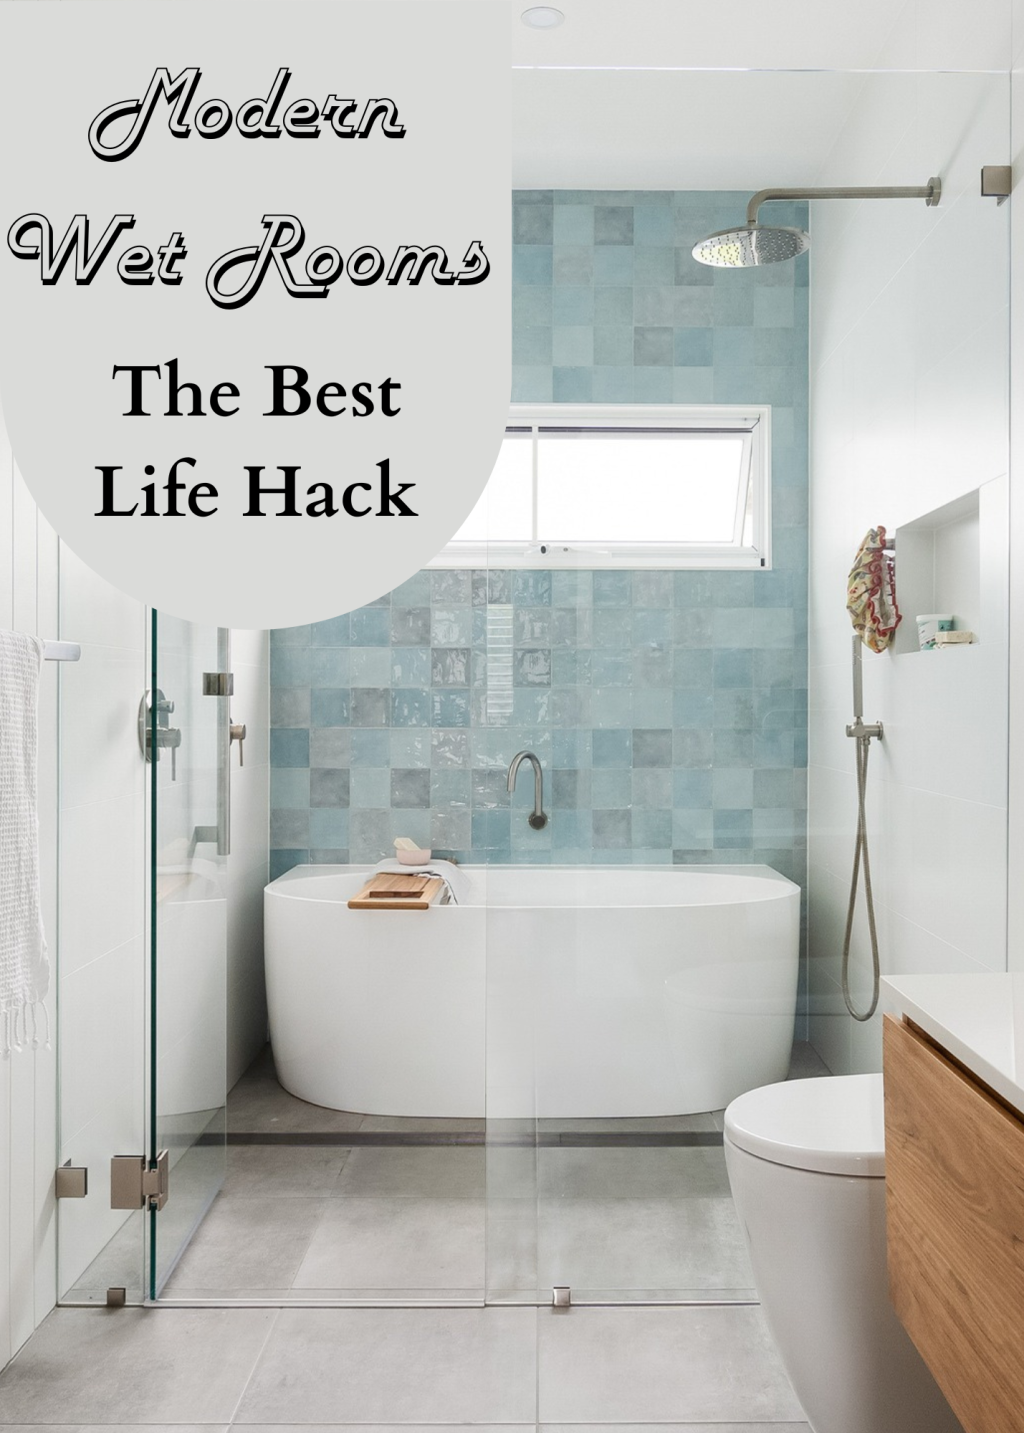 Modern Wet Rooms Are The Best Bathroom Life Hack